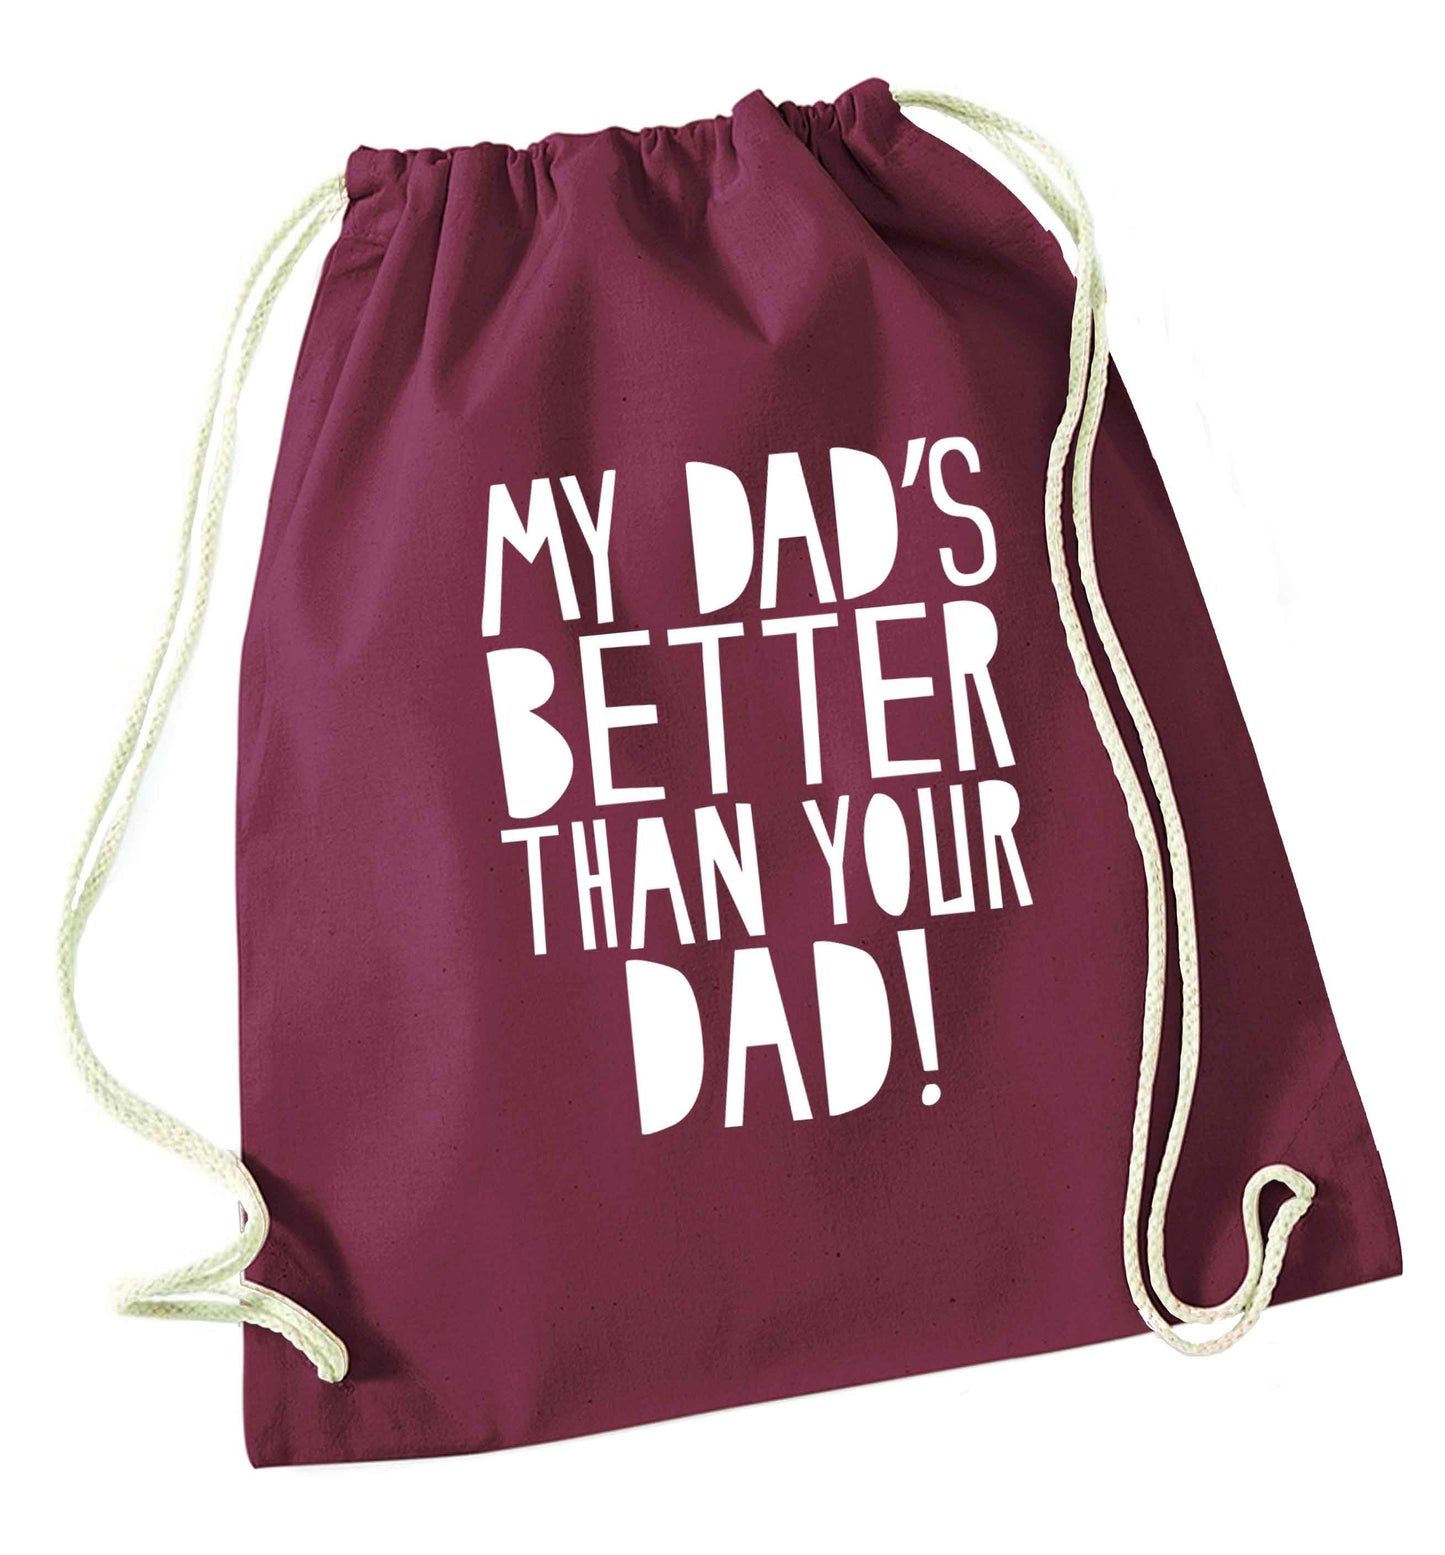 My dad's better than your dad! maroon drawstring bag